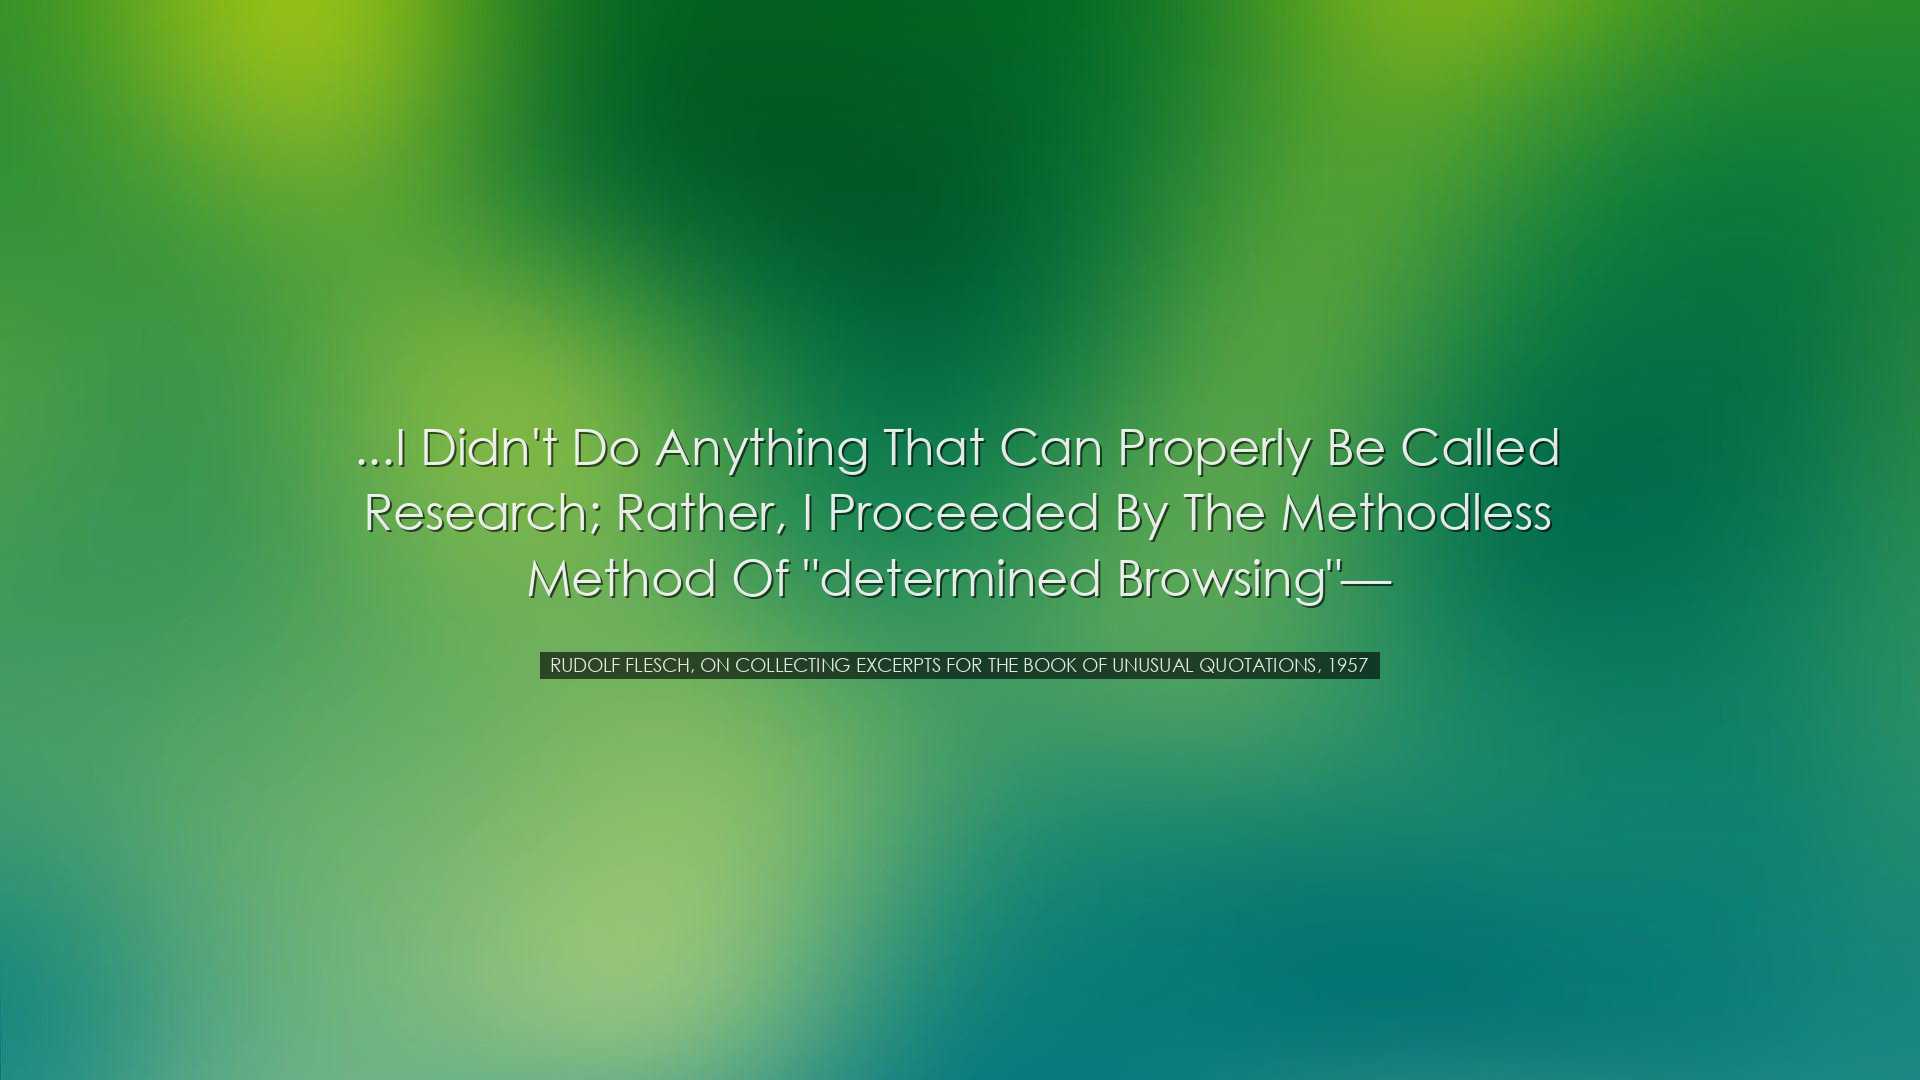 ...I didn't do anything that can properly be called research; rath